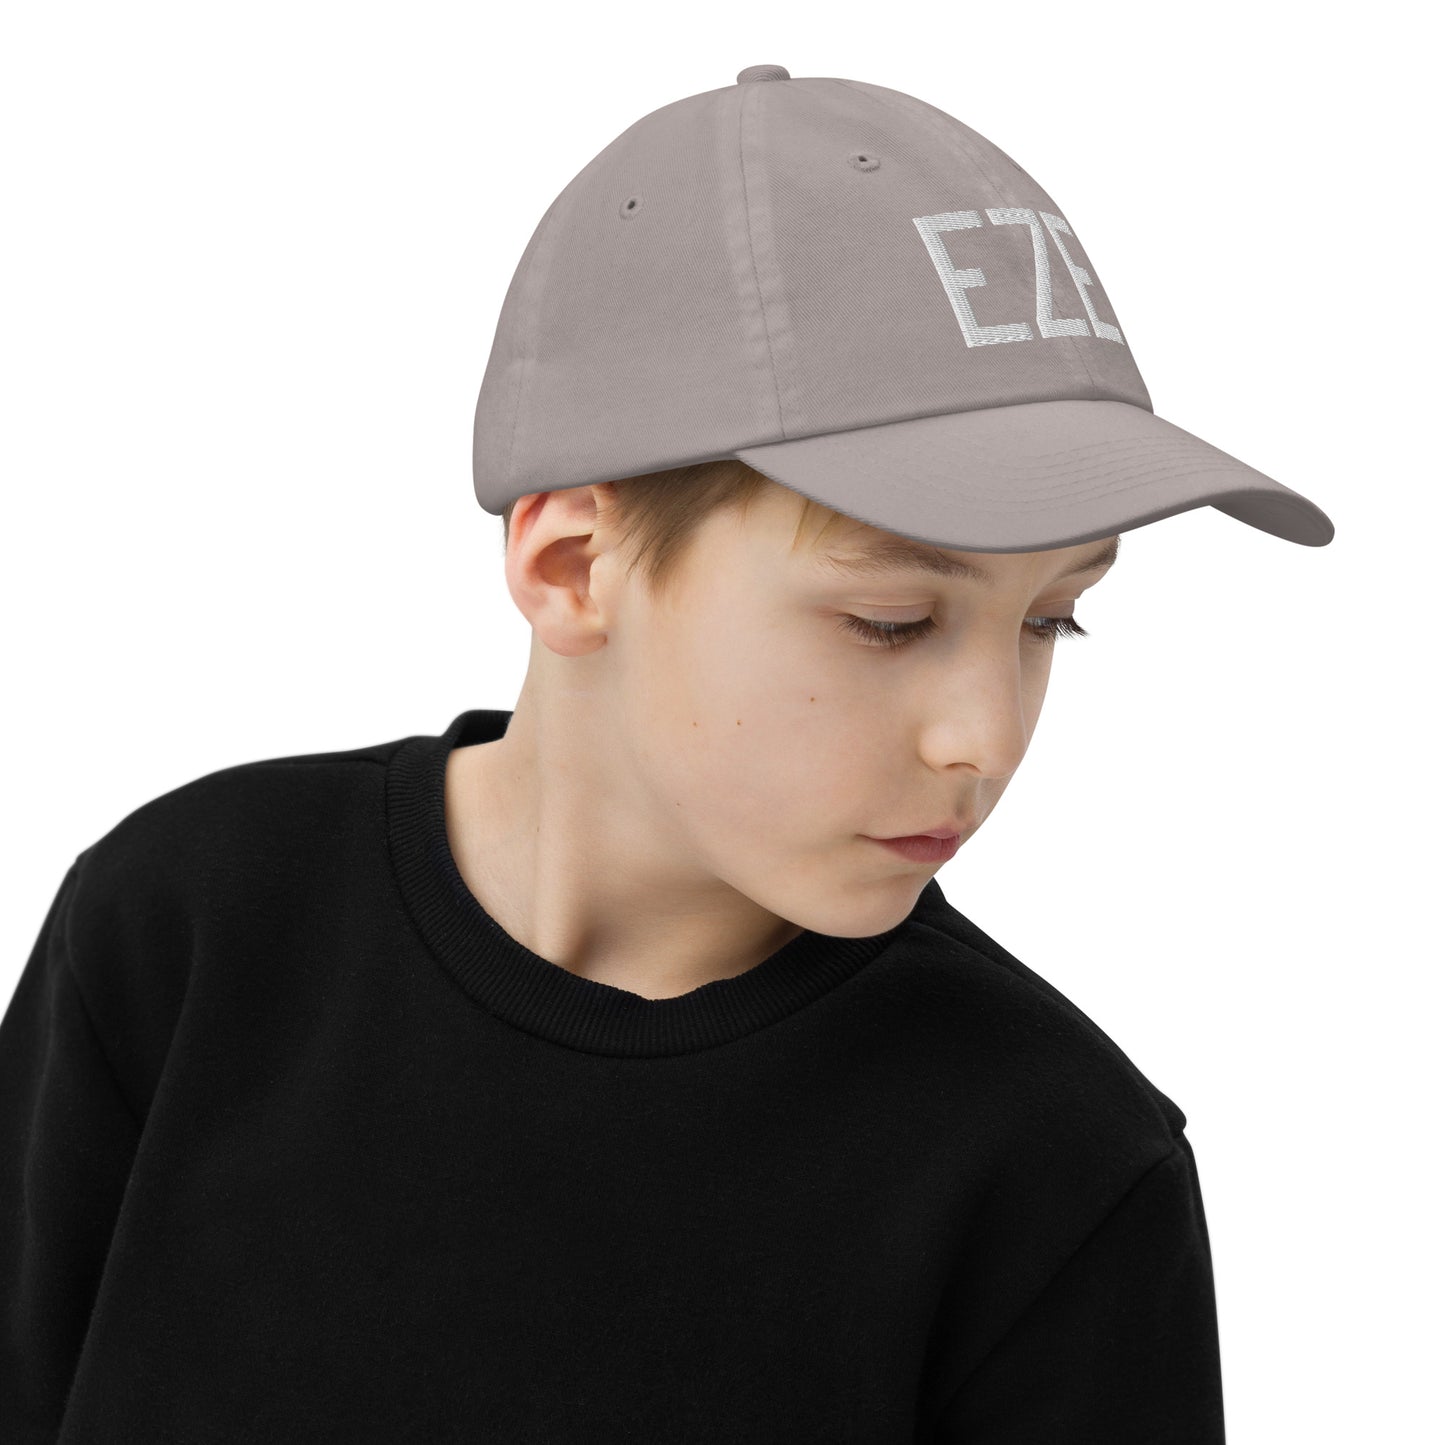 Airport Code Kid's Baseball Cap - White • EZE Buenos Aires • YHM Designs - Image 07